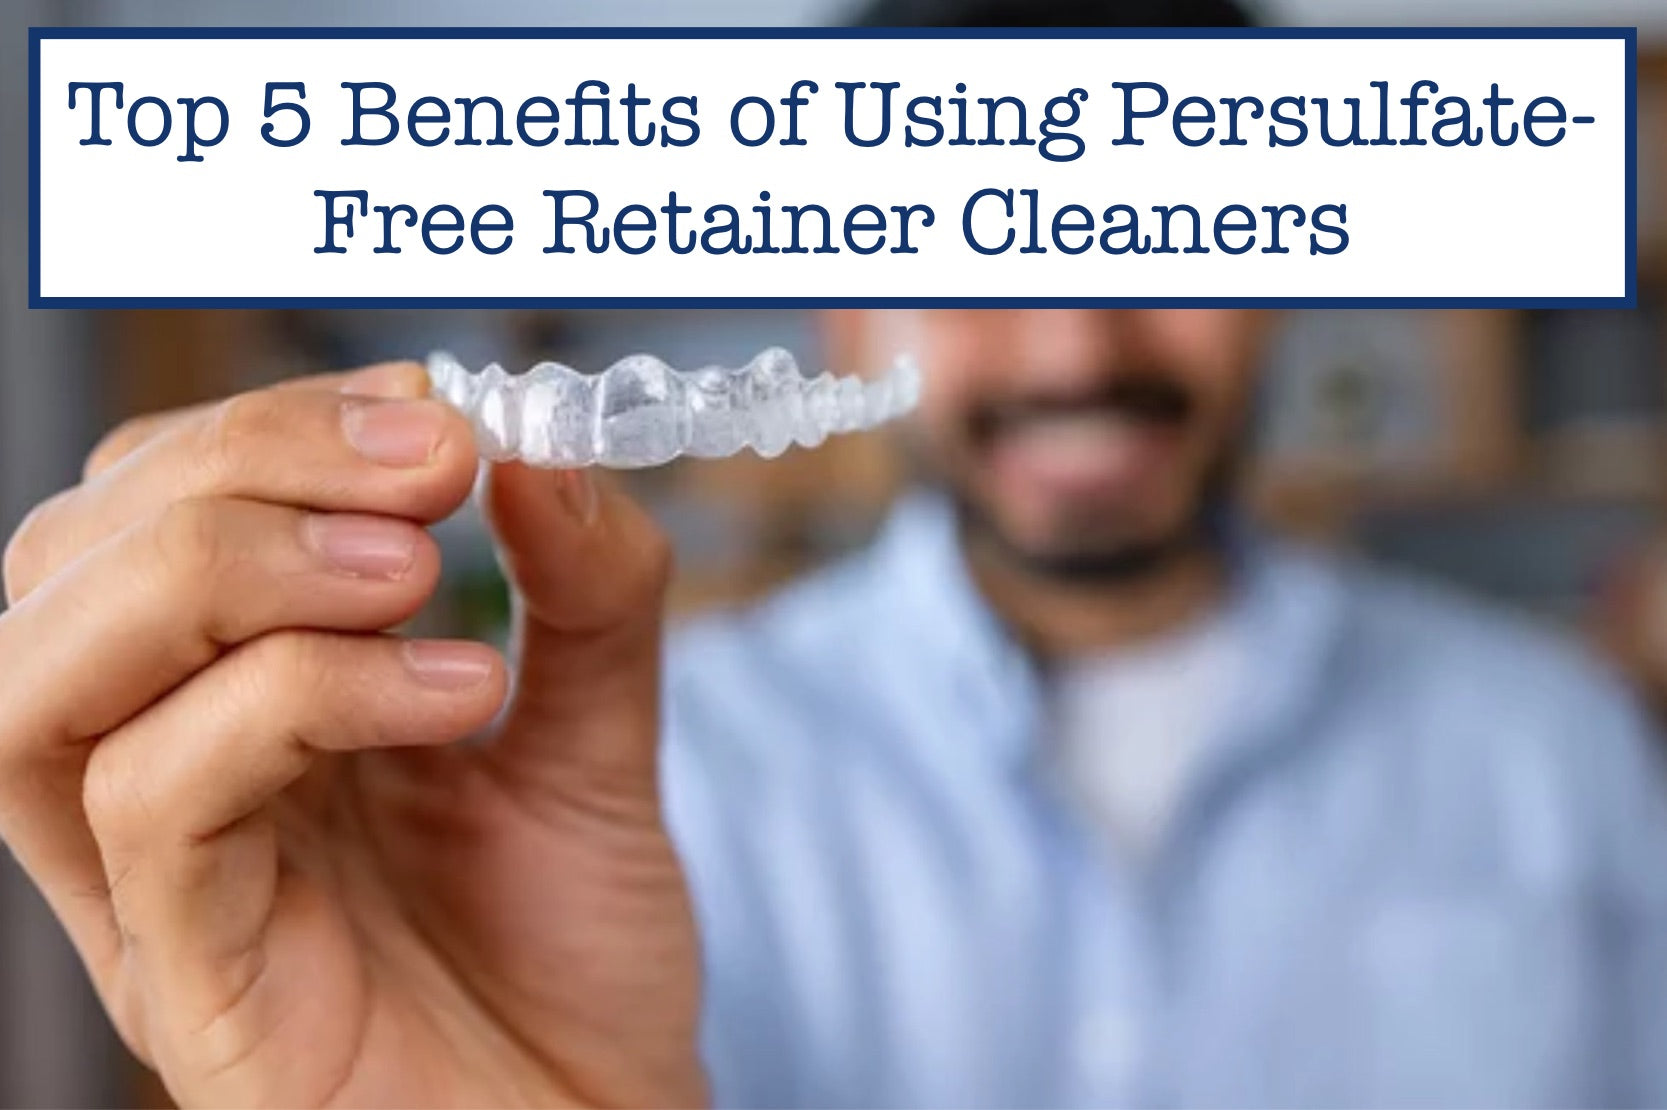 Top 5 Benefits of Using Persulfate-Free Retainer Cleaners